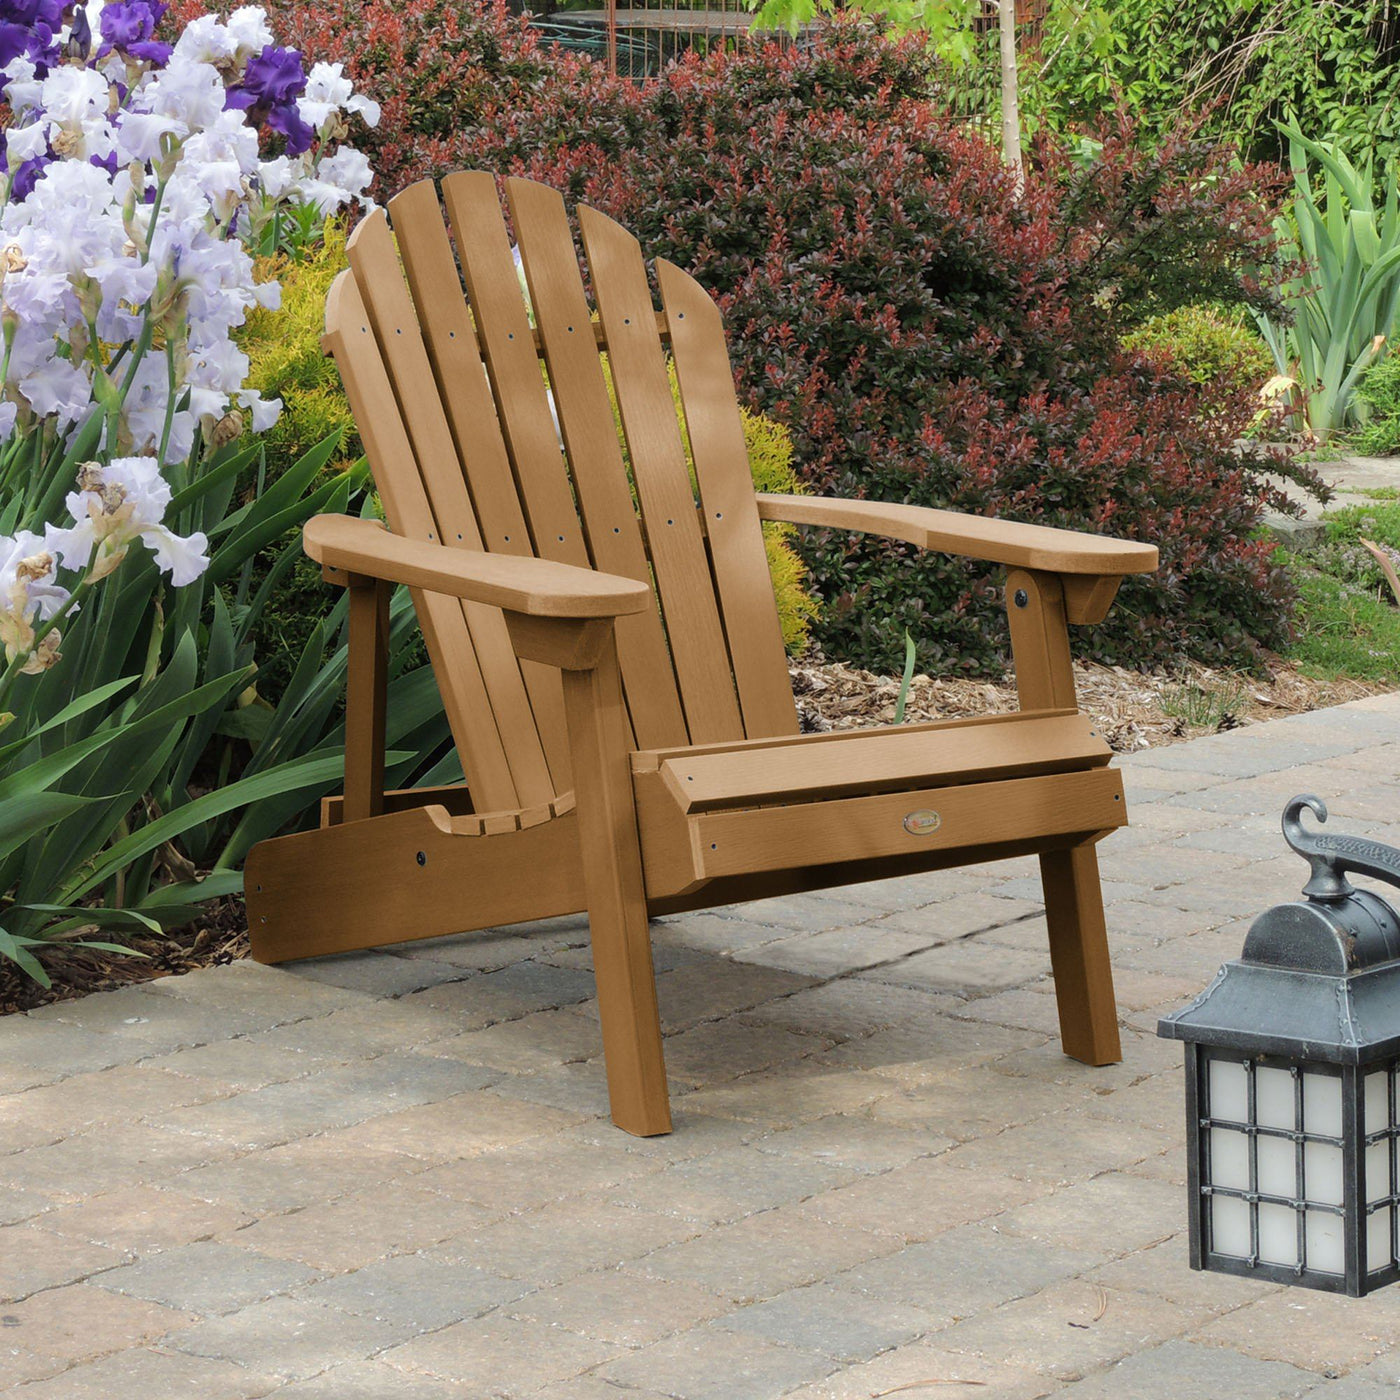 Toffee brown Hamilton Adirondack chair on stone with flowers behind